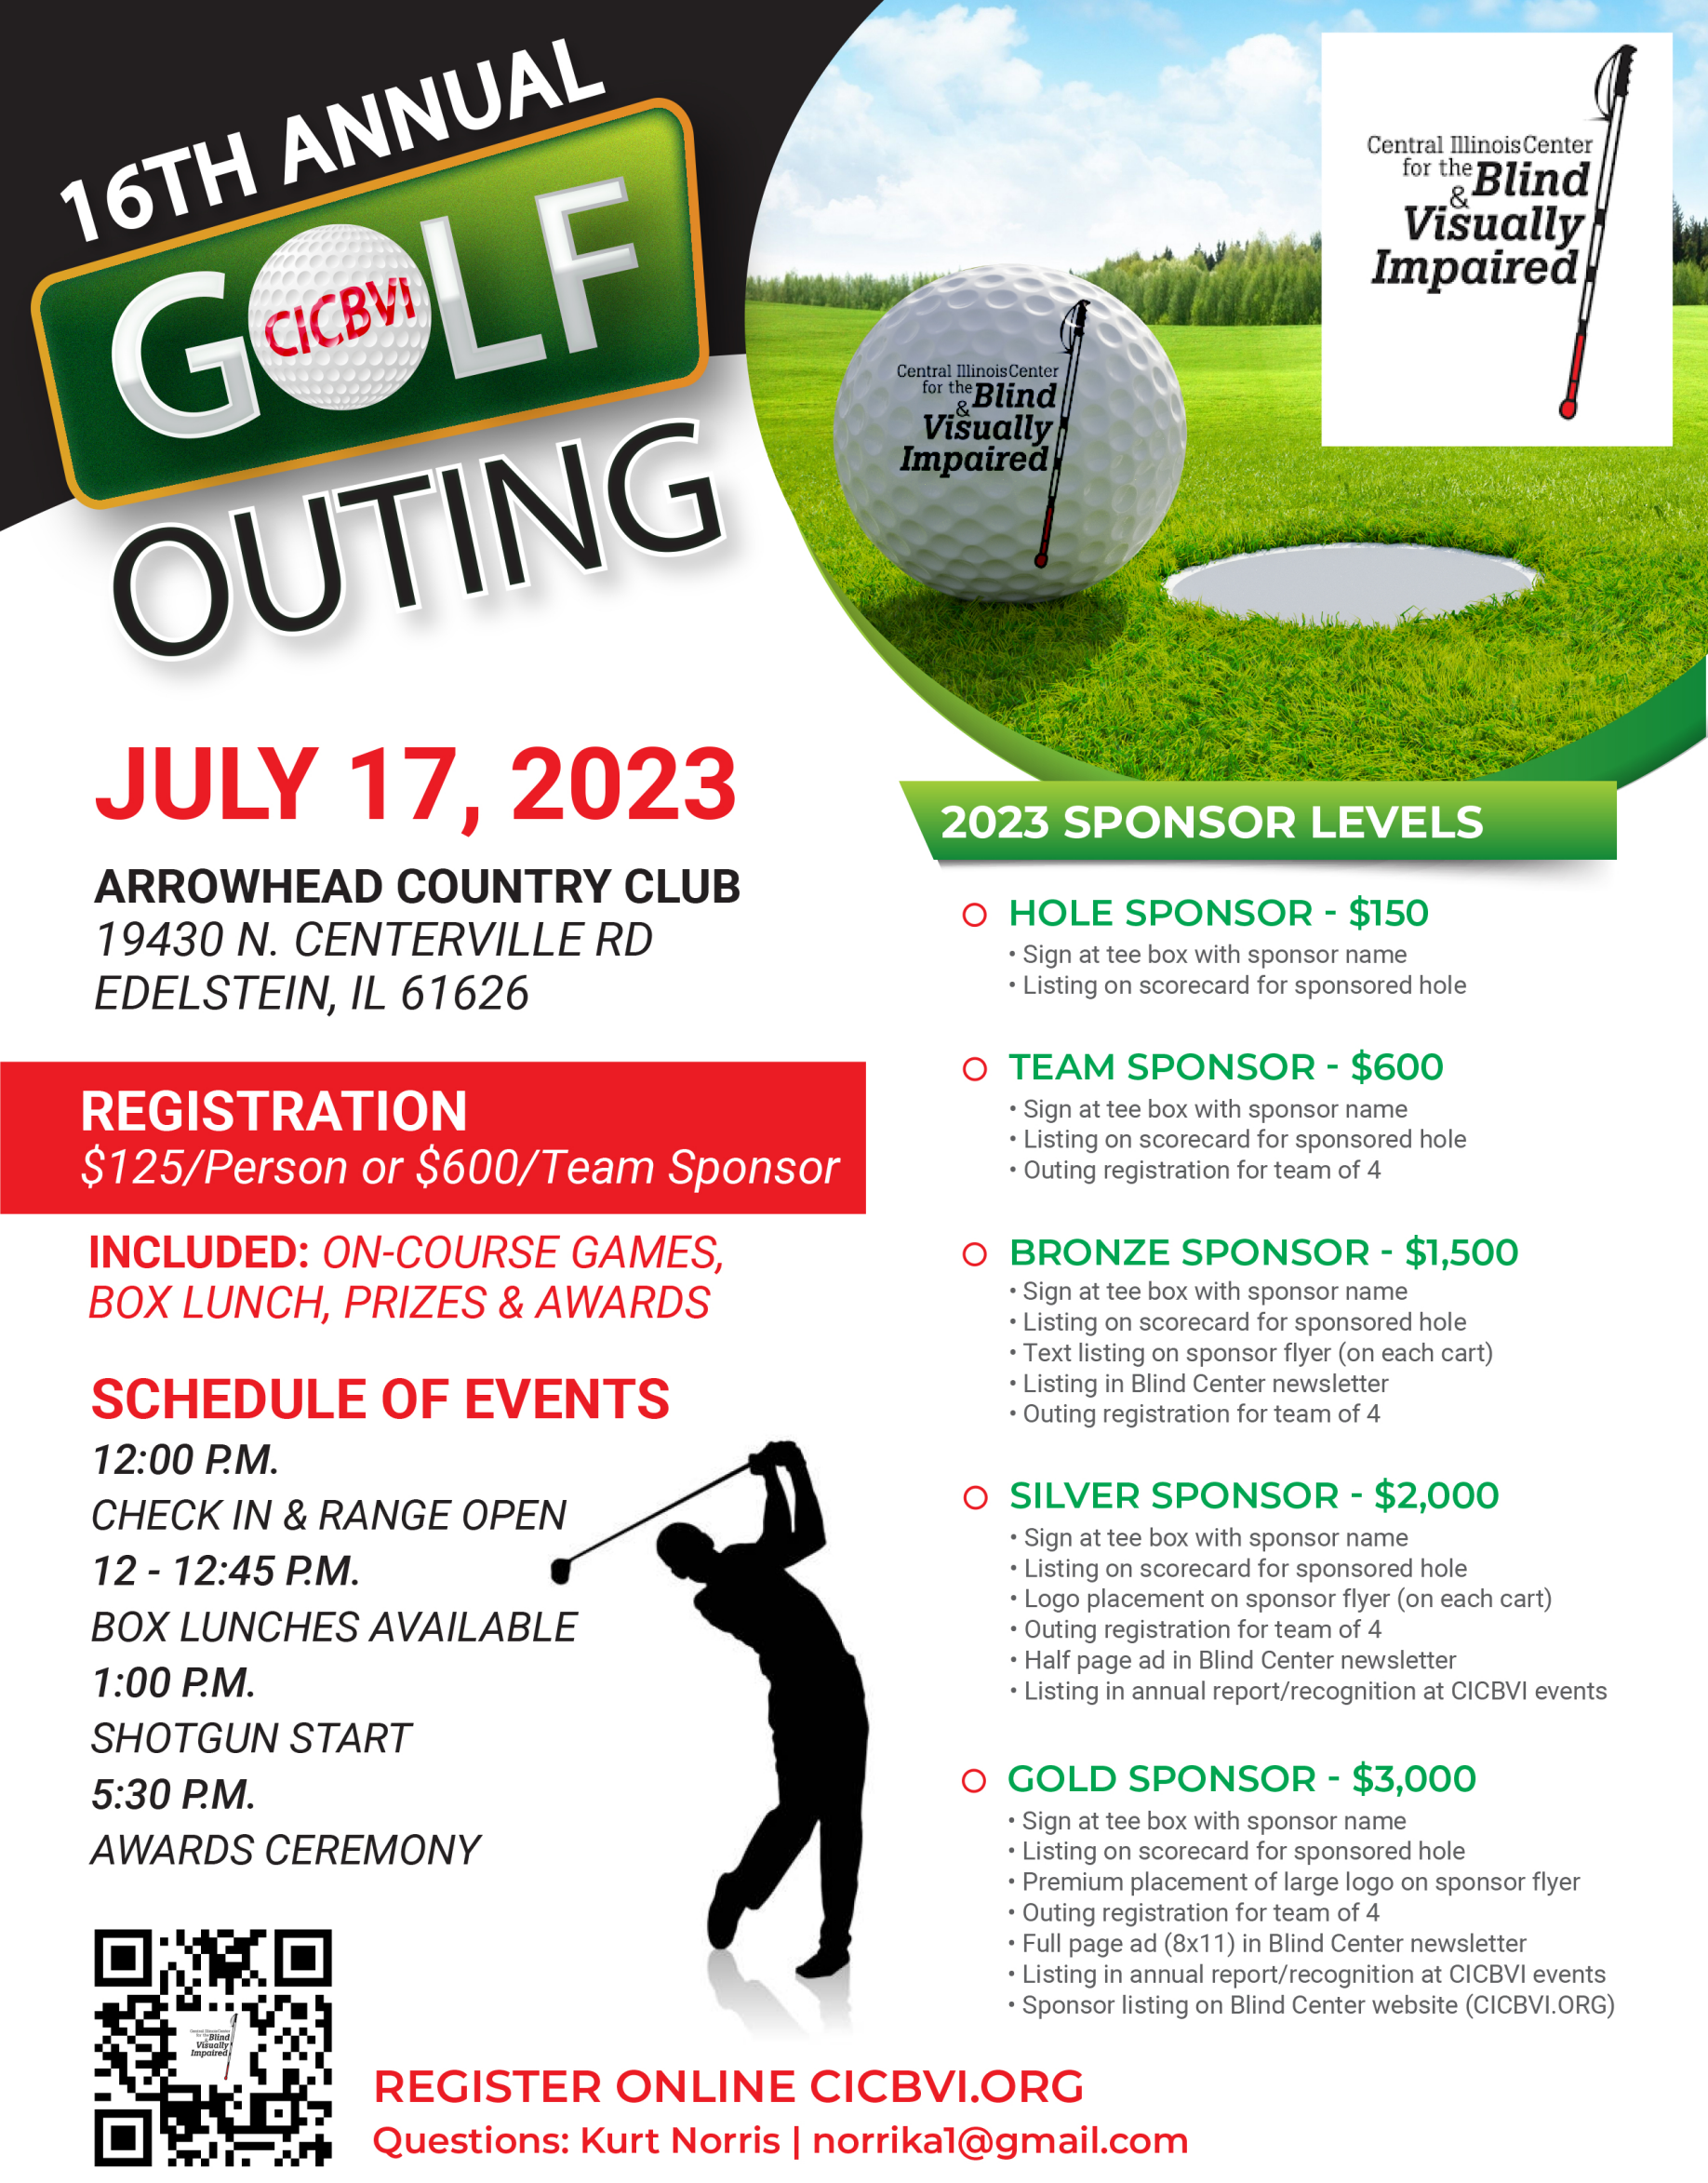 Golf outing flyer with details. click on button below to get text details